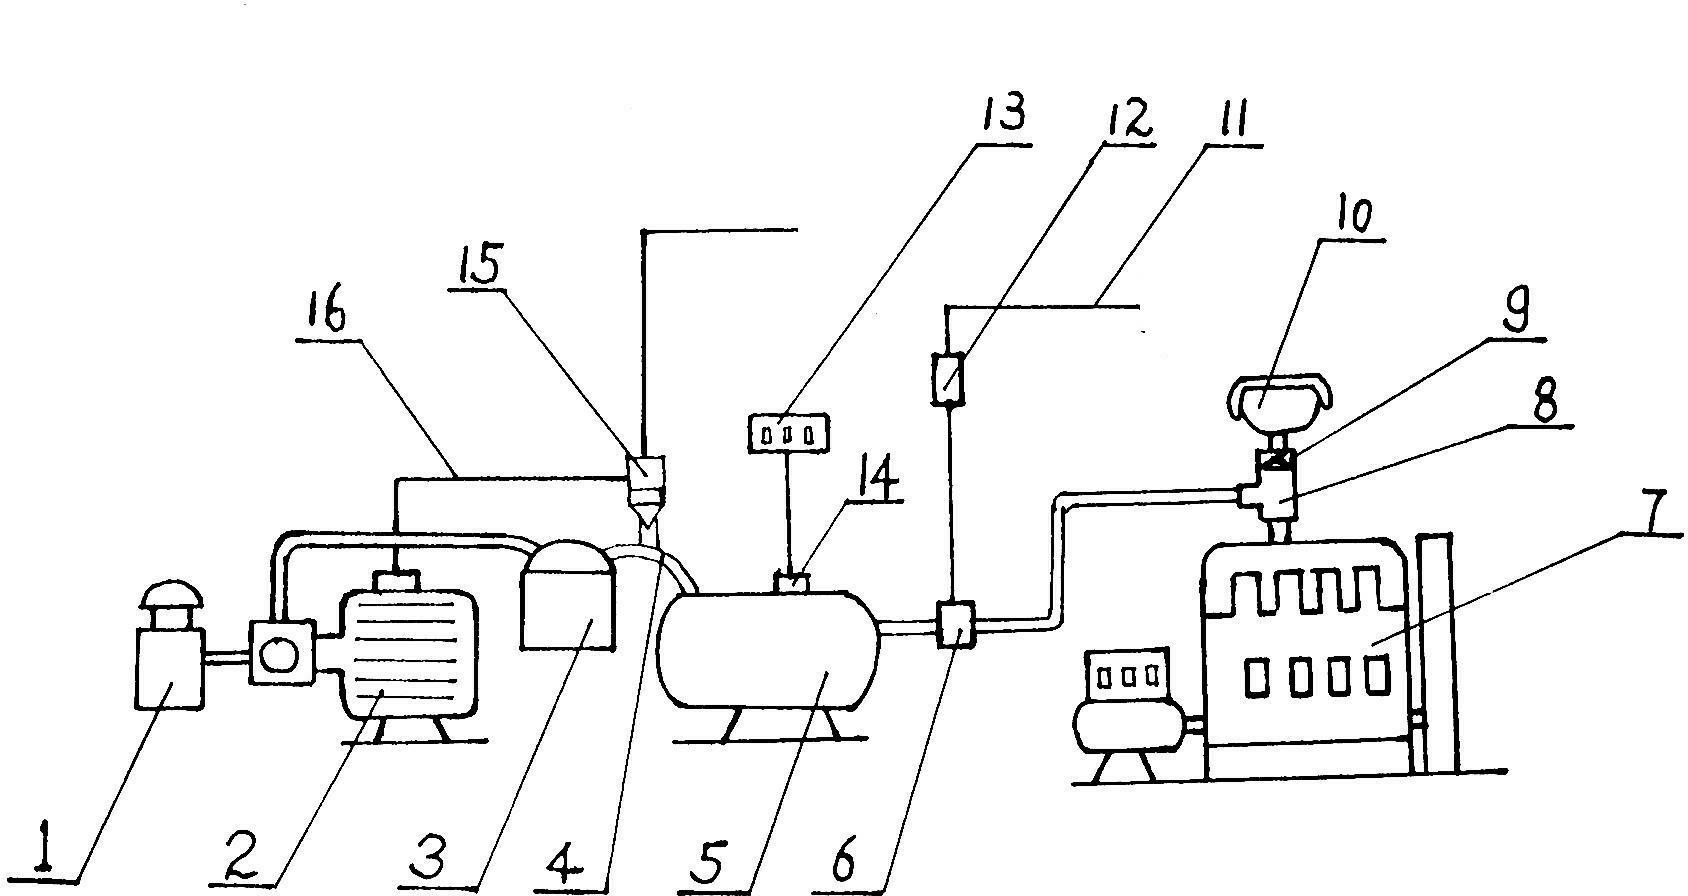 Power-compensating device for generating equipment of internal-combustion engine at plateau area